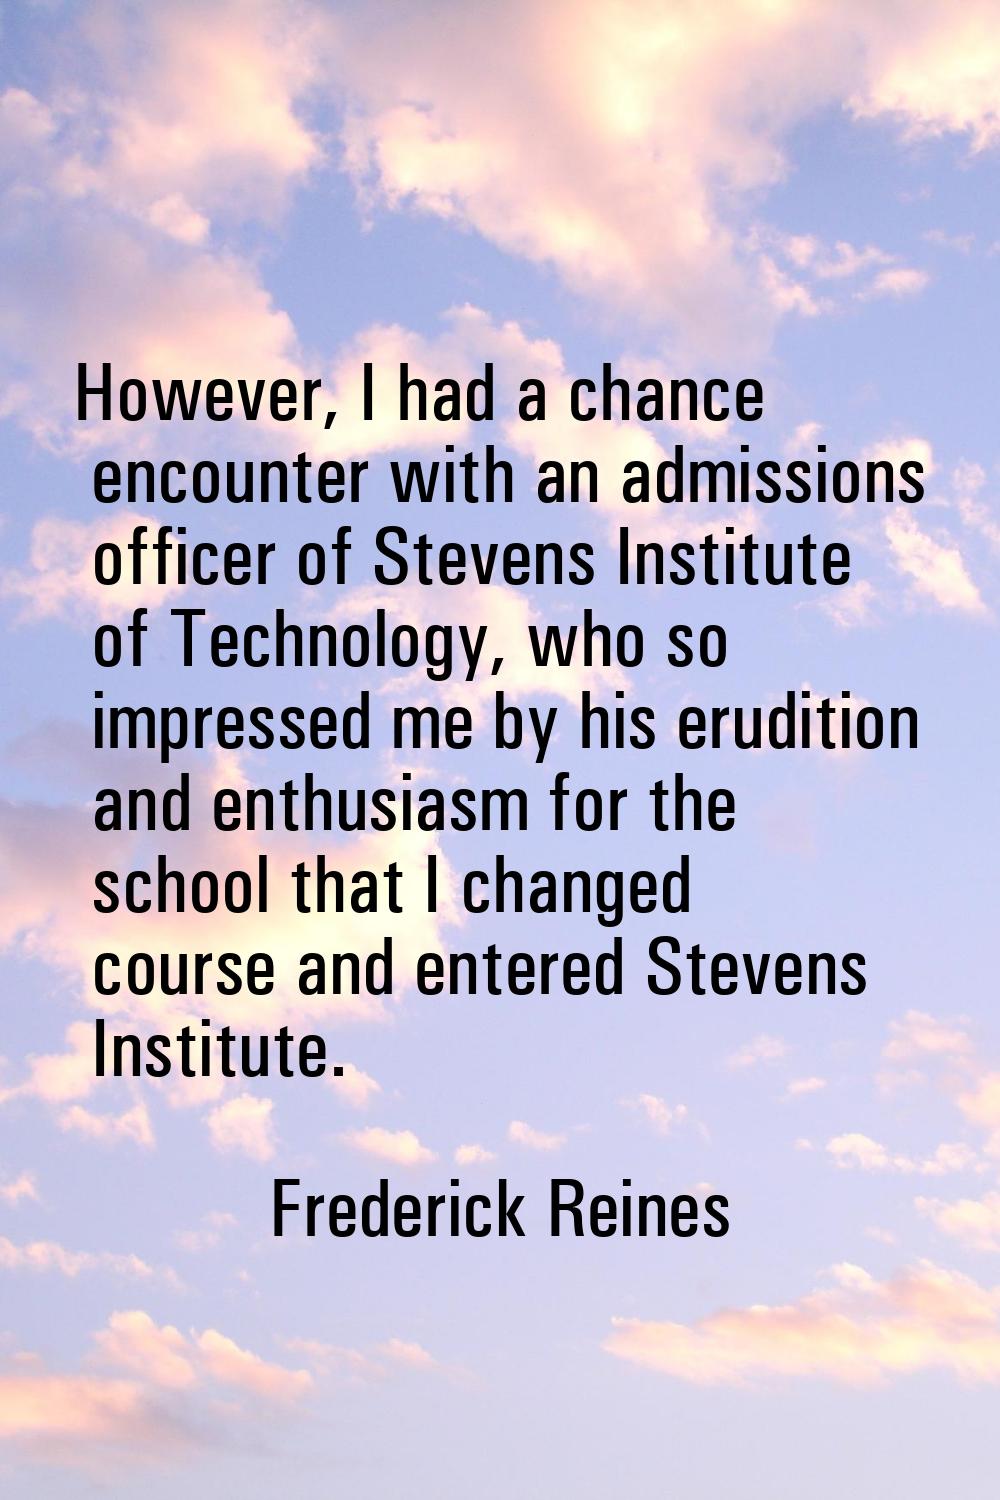 However, I had a chance encounter with an admissions officer of Stevens Institute of Technology, wh